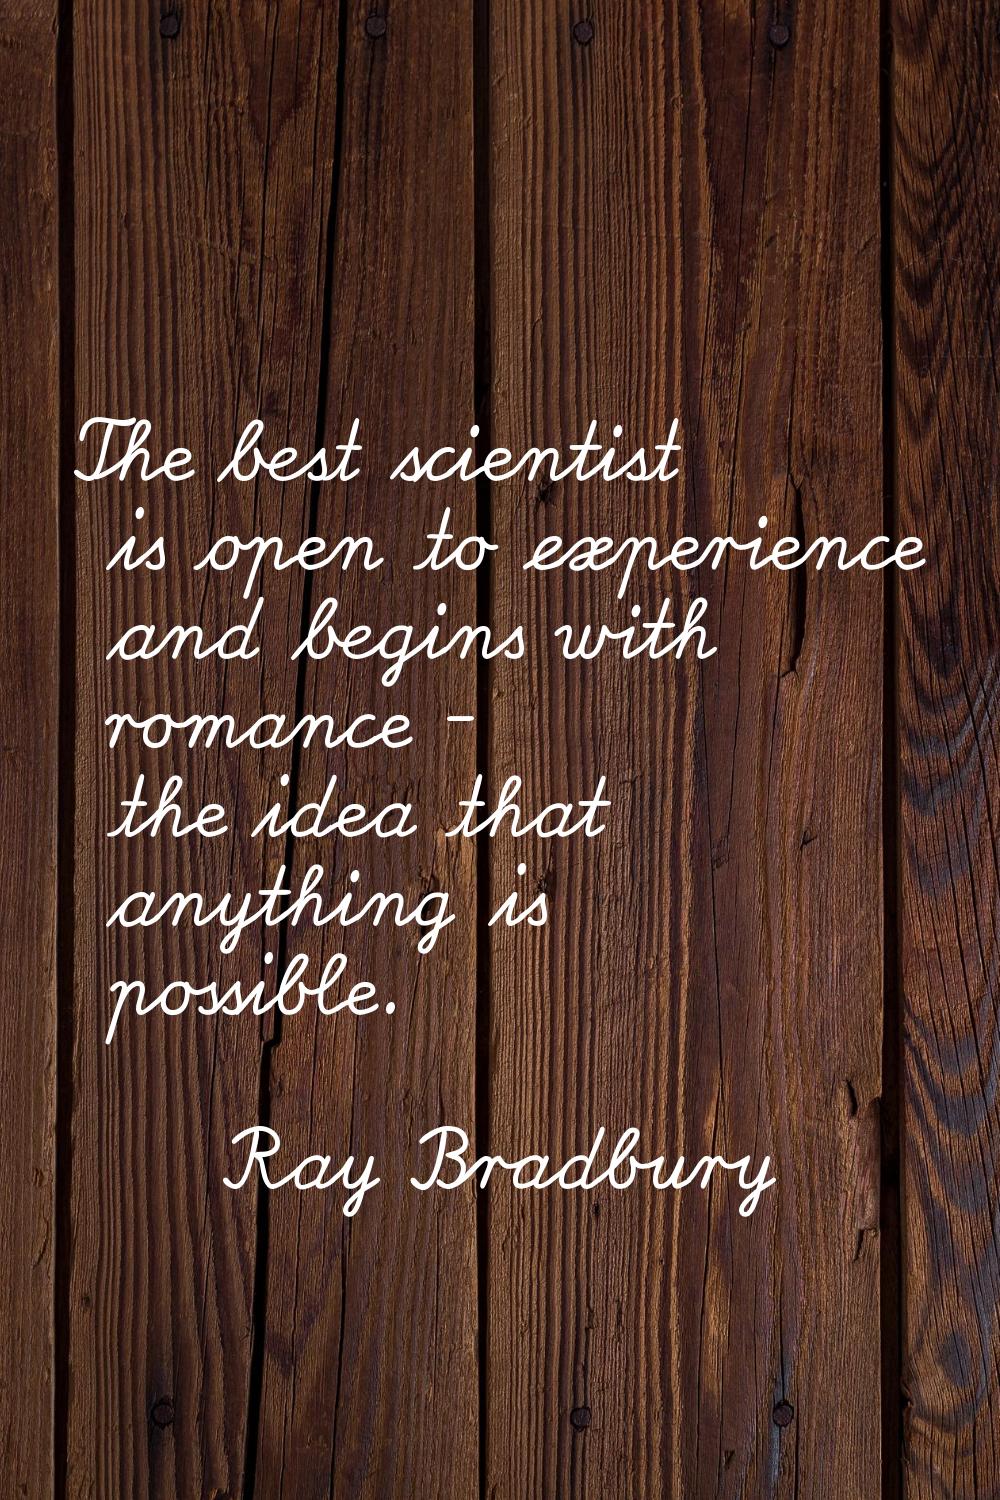 The best scientist is open to experience and begins with romance - the idea that anything is possib